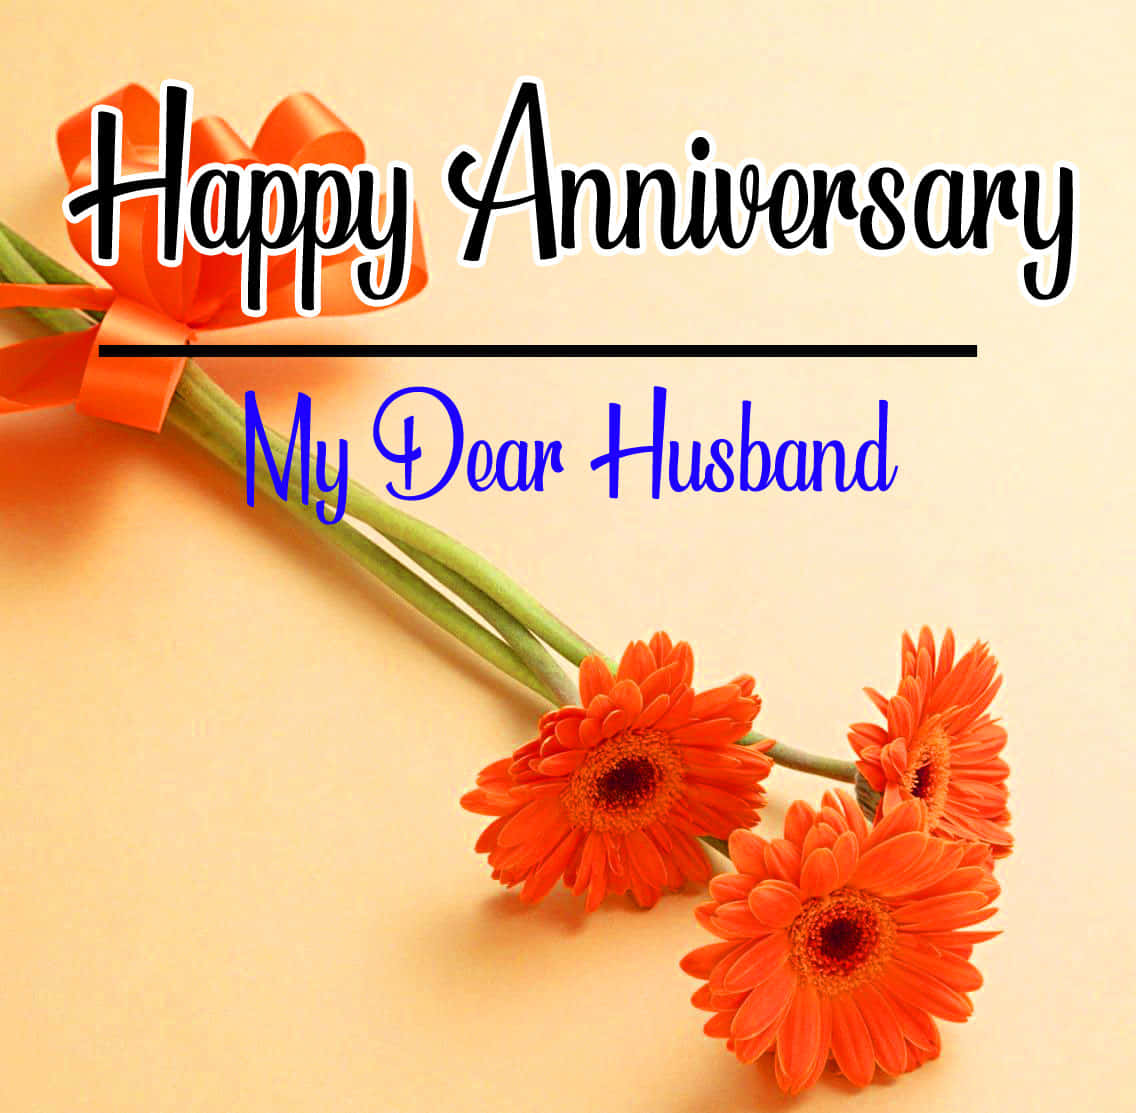 Anniversary Message To The Husband